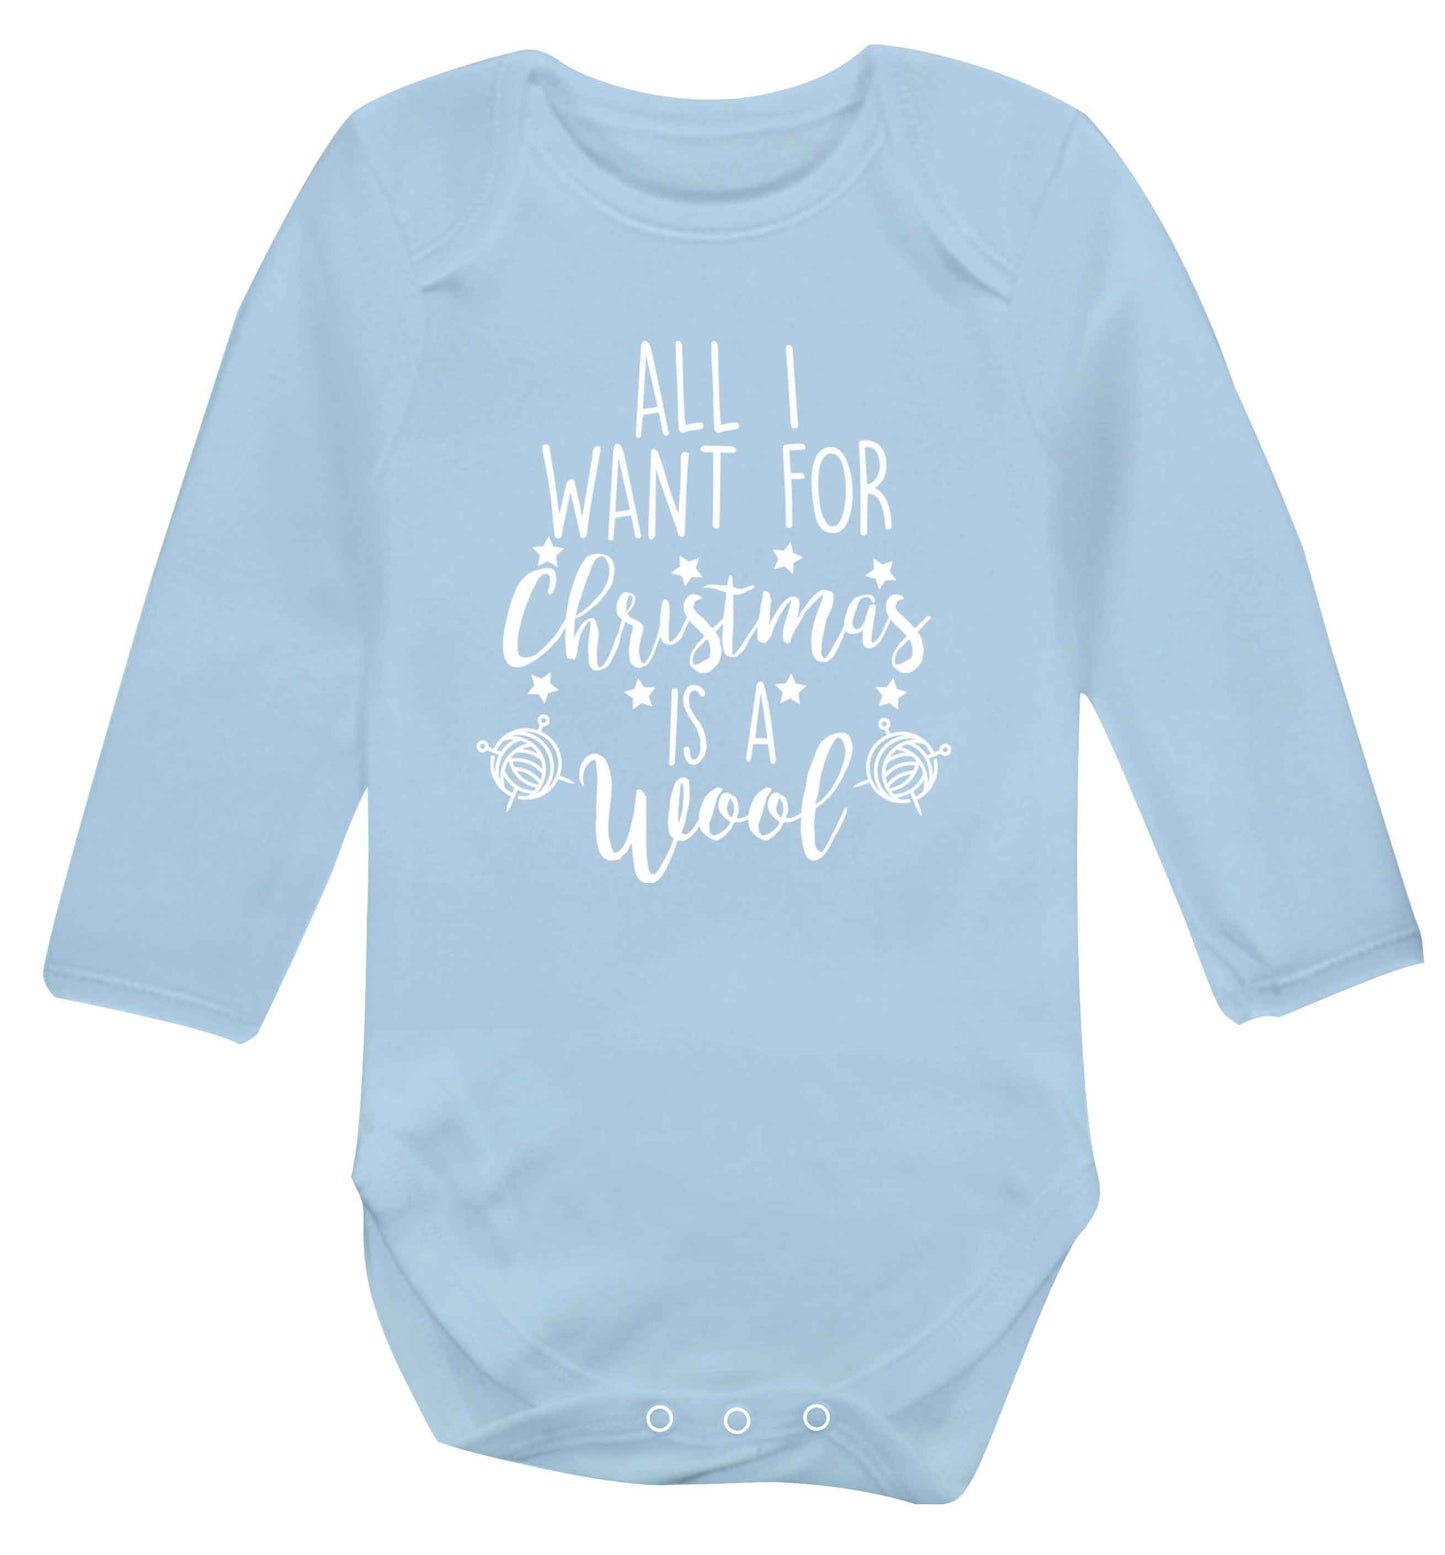 All I want for Christmas is wool! Baby Vest long sleeved pale blue 6-12 months